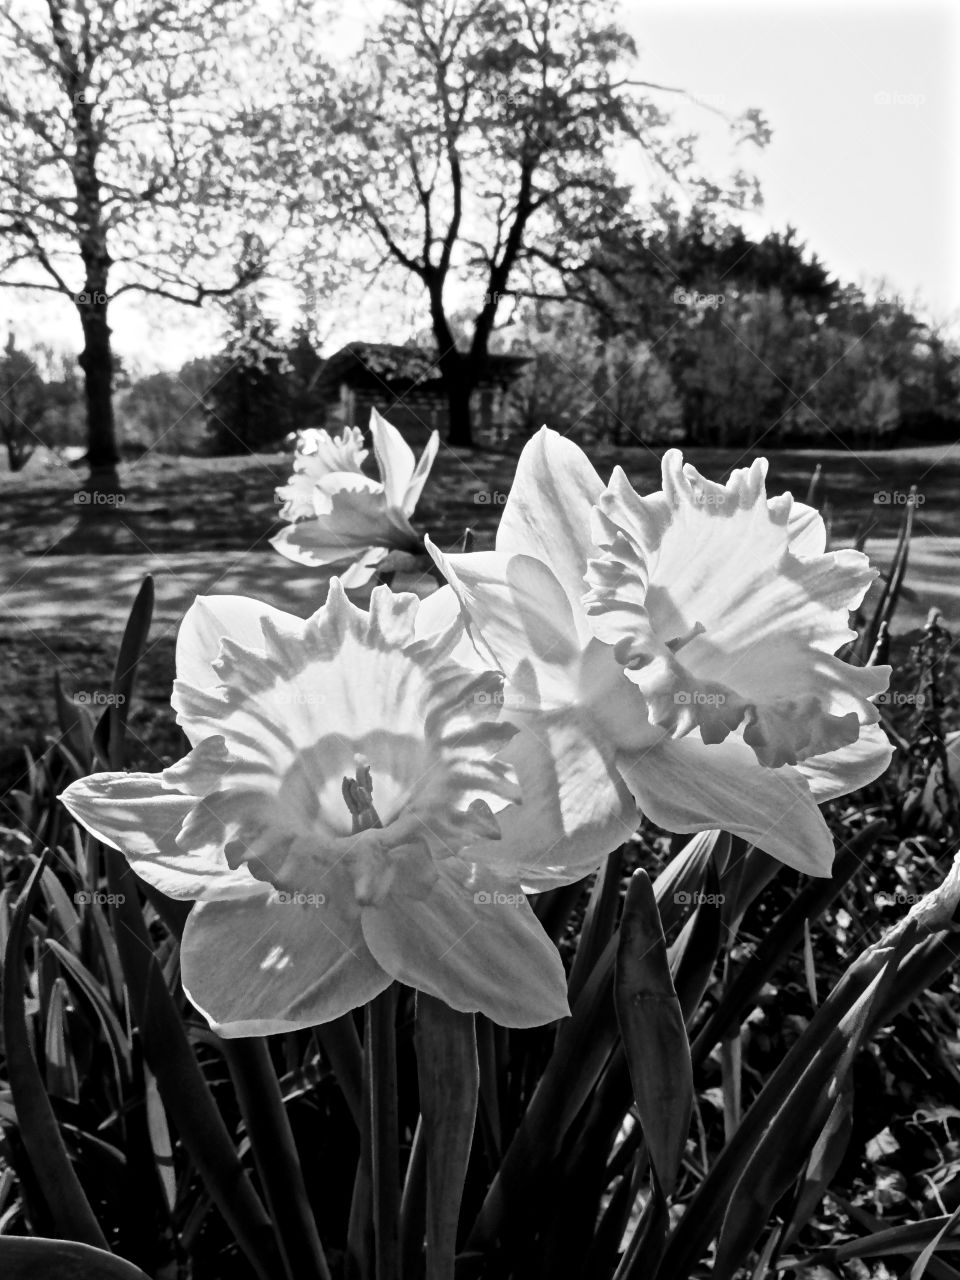 daffodils of spring. Newly sprouted spring daffodils at the park.